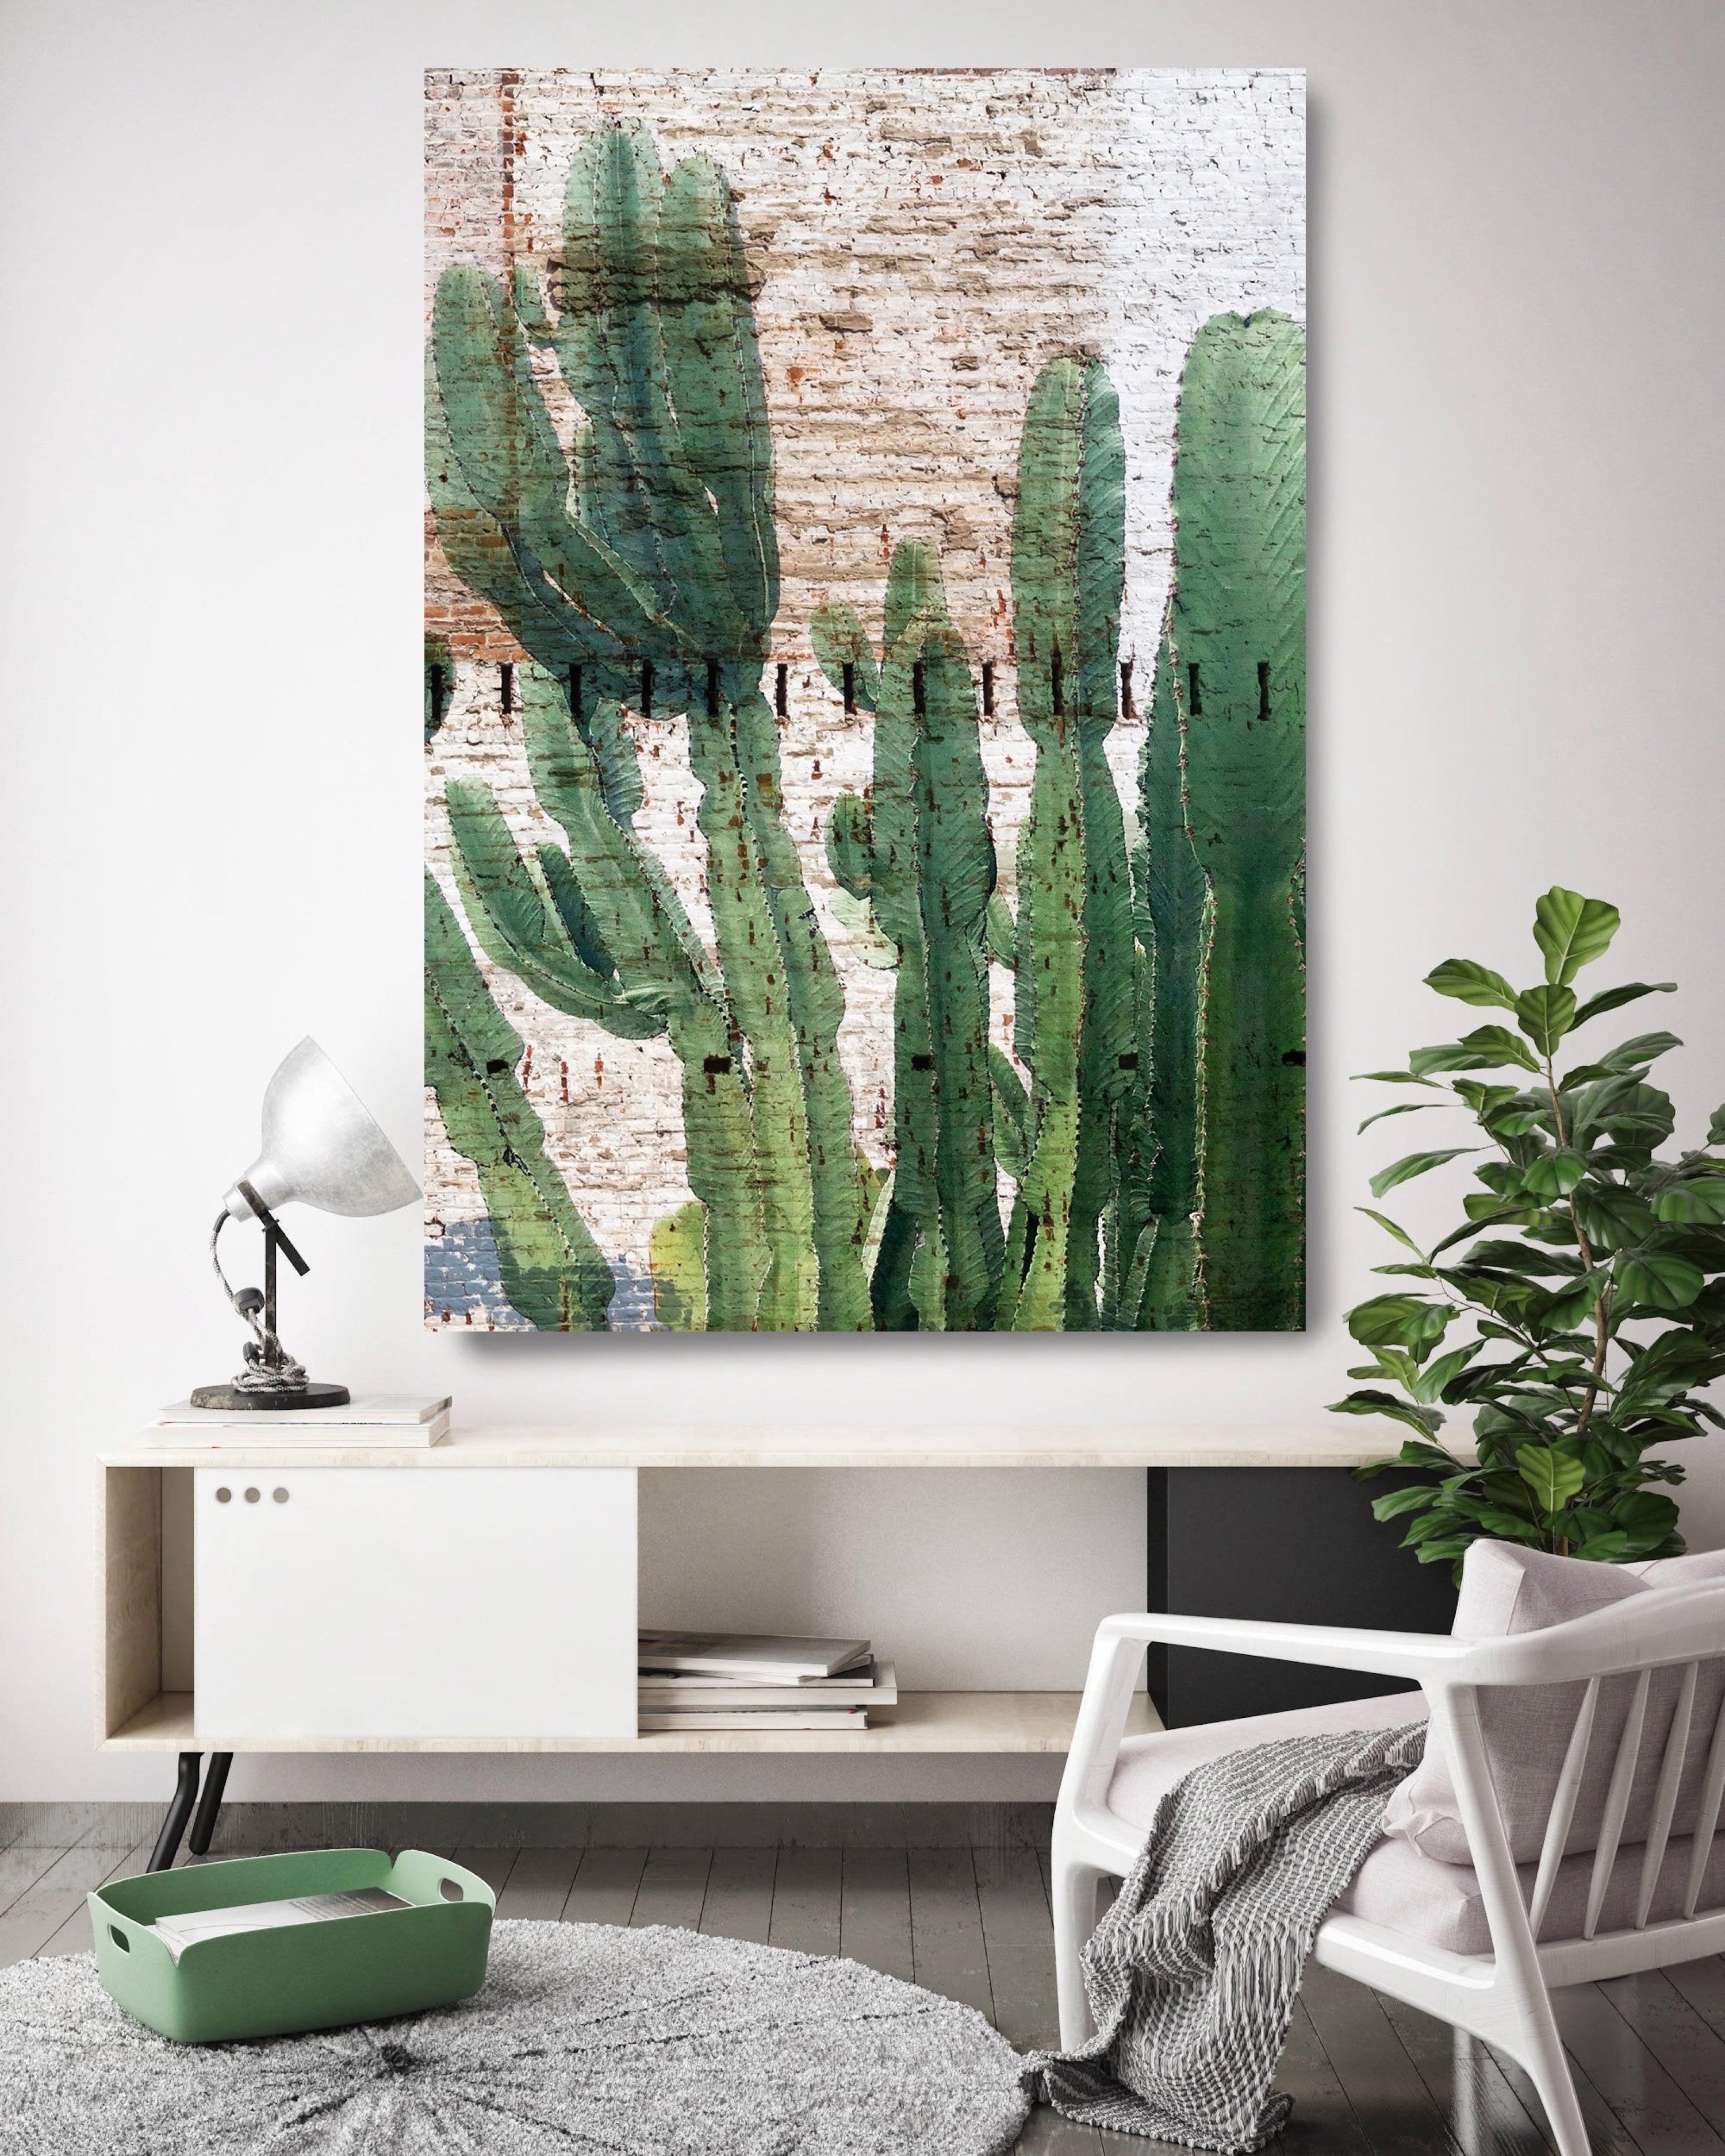 Irena Orlov Landscape Painting - Cactus Garden, Succulent Painting Hand Embellished Giclee Art on Canvas